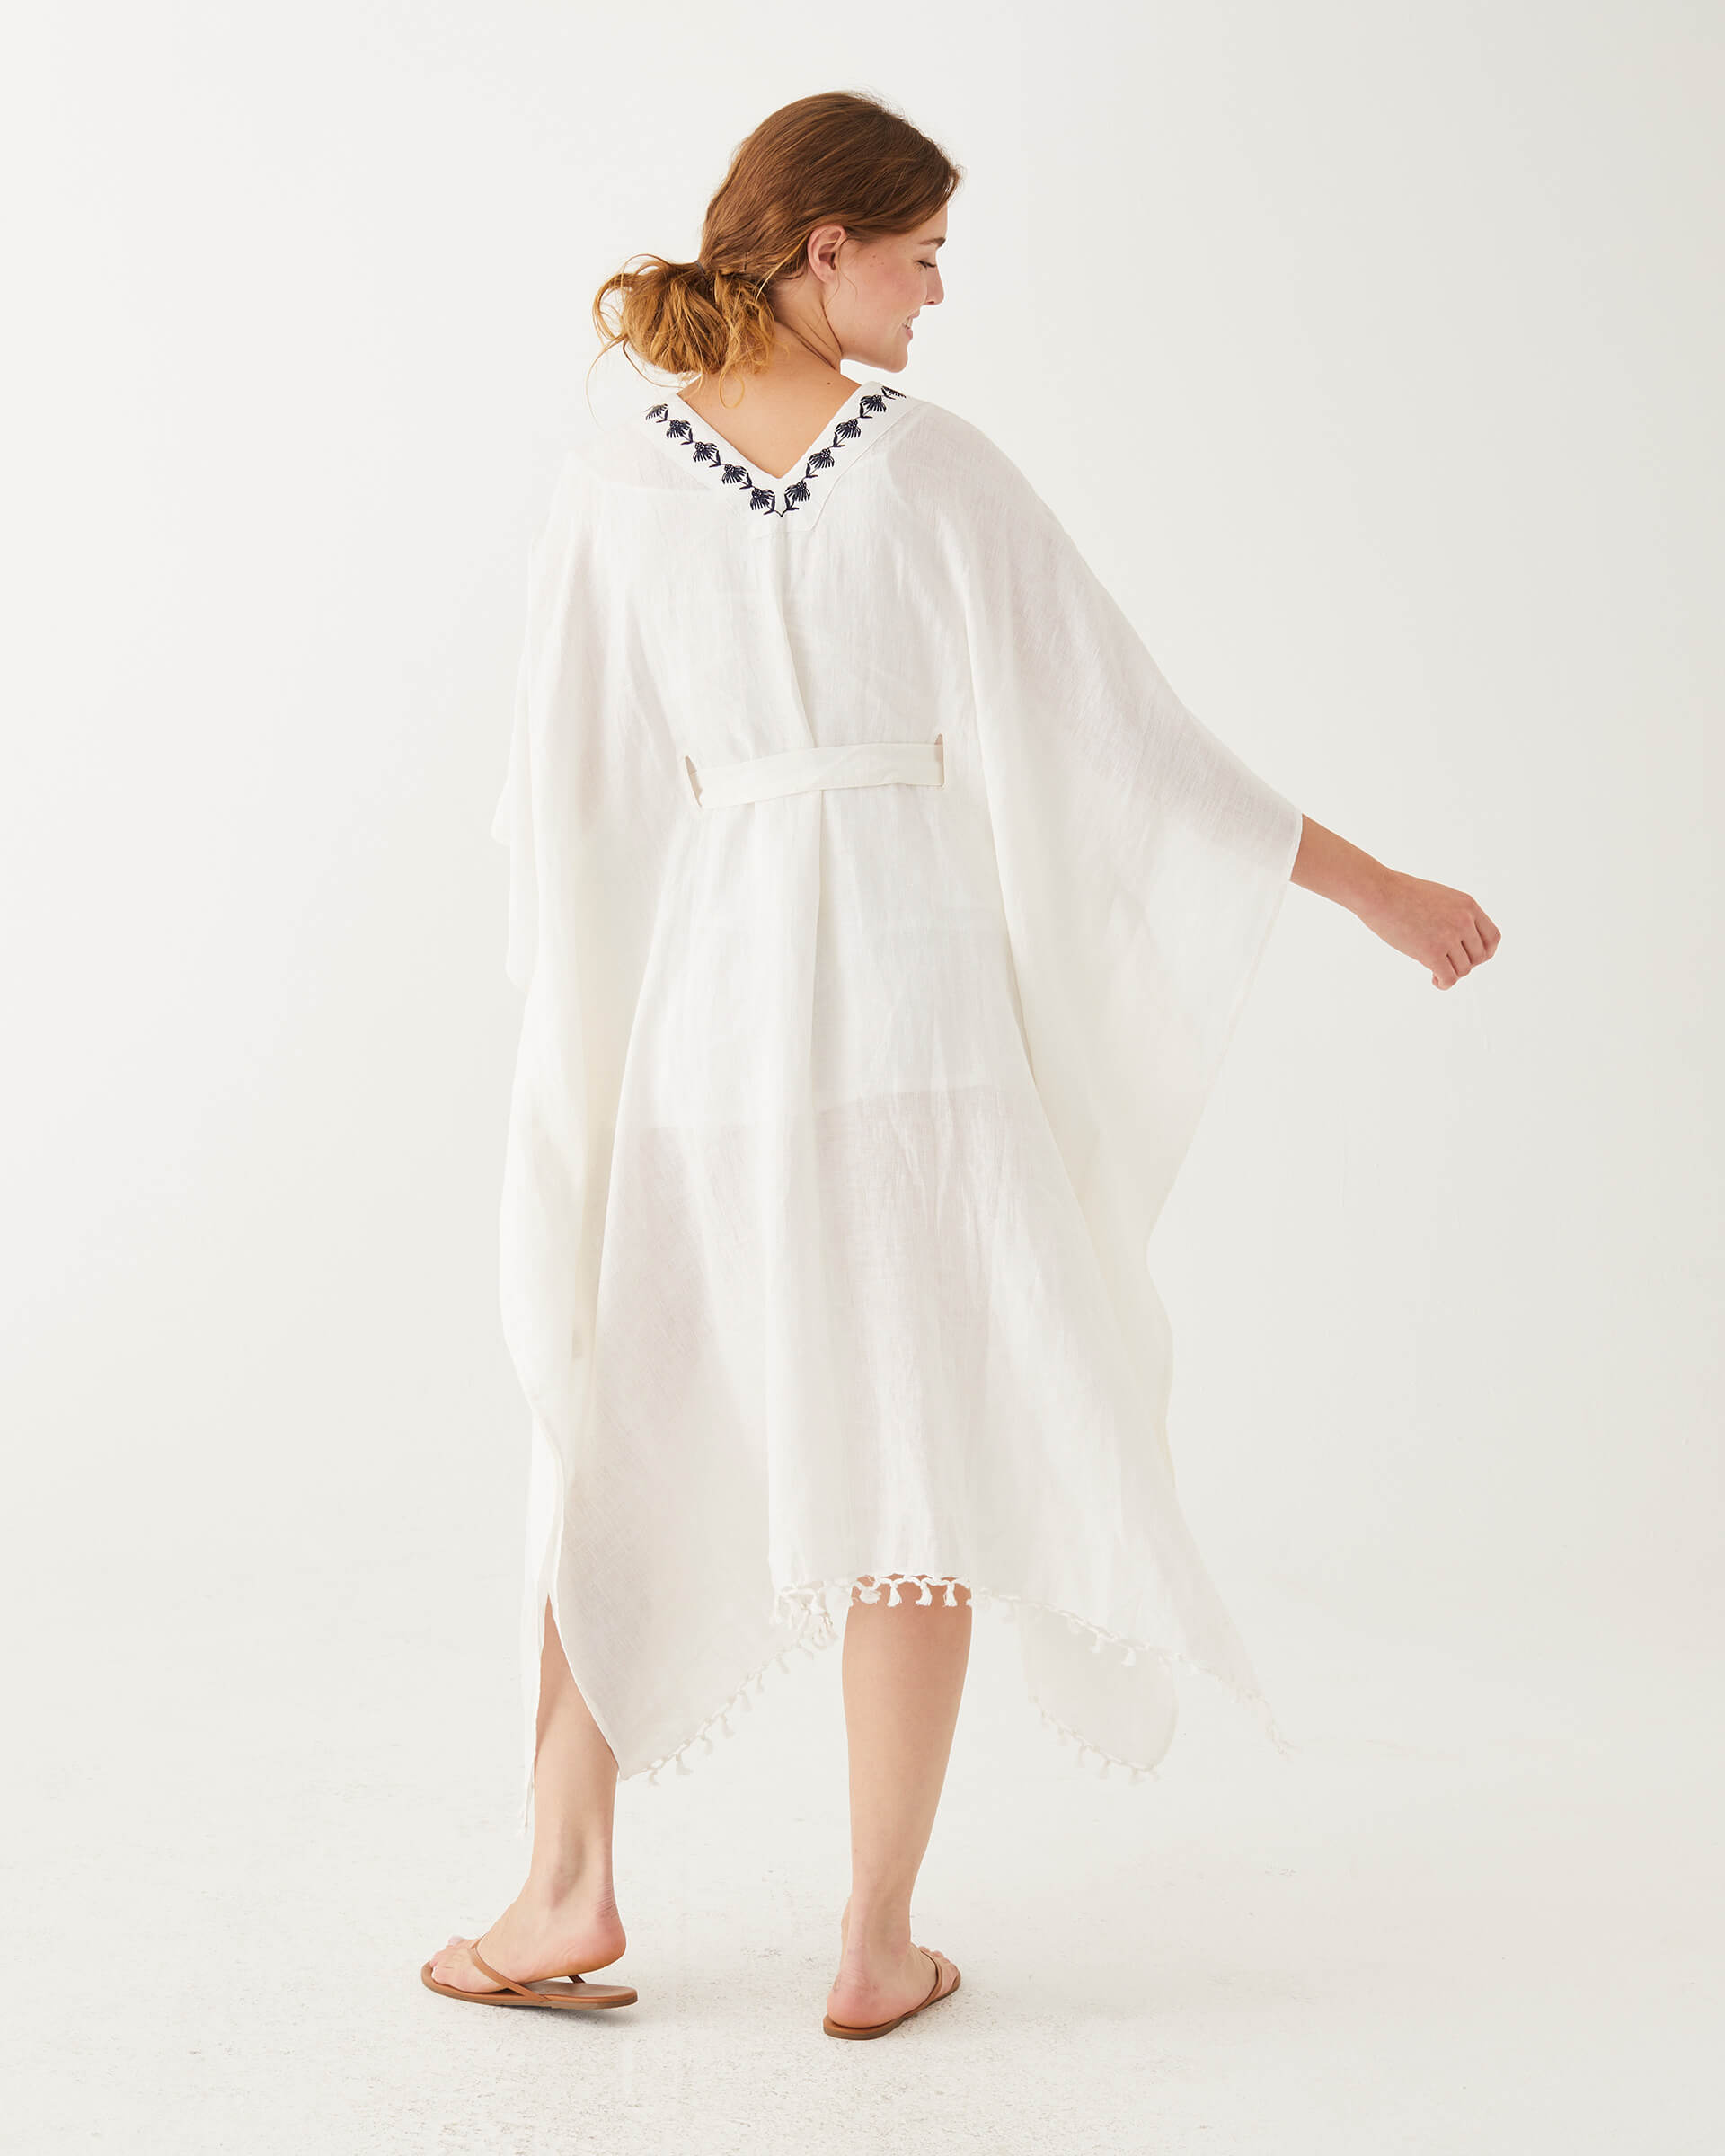 female wearing white and blue embroidered kaftan with v-neck and belt backwards on white background